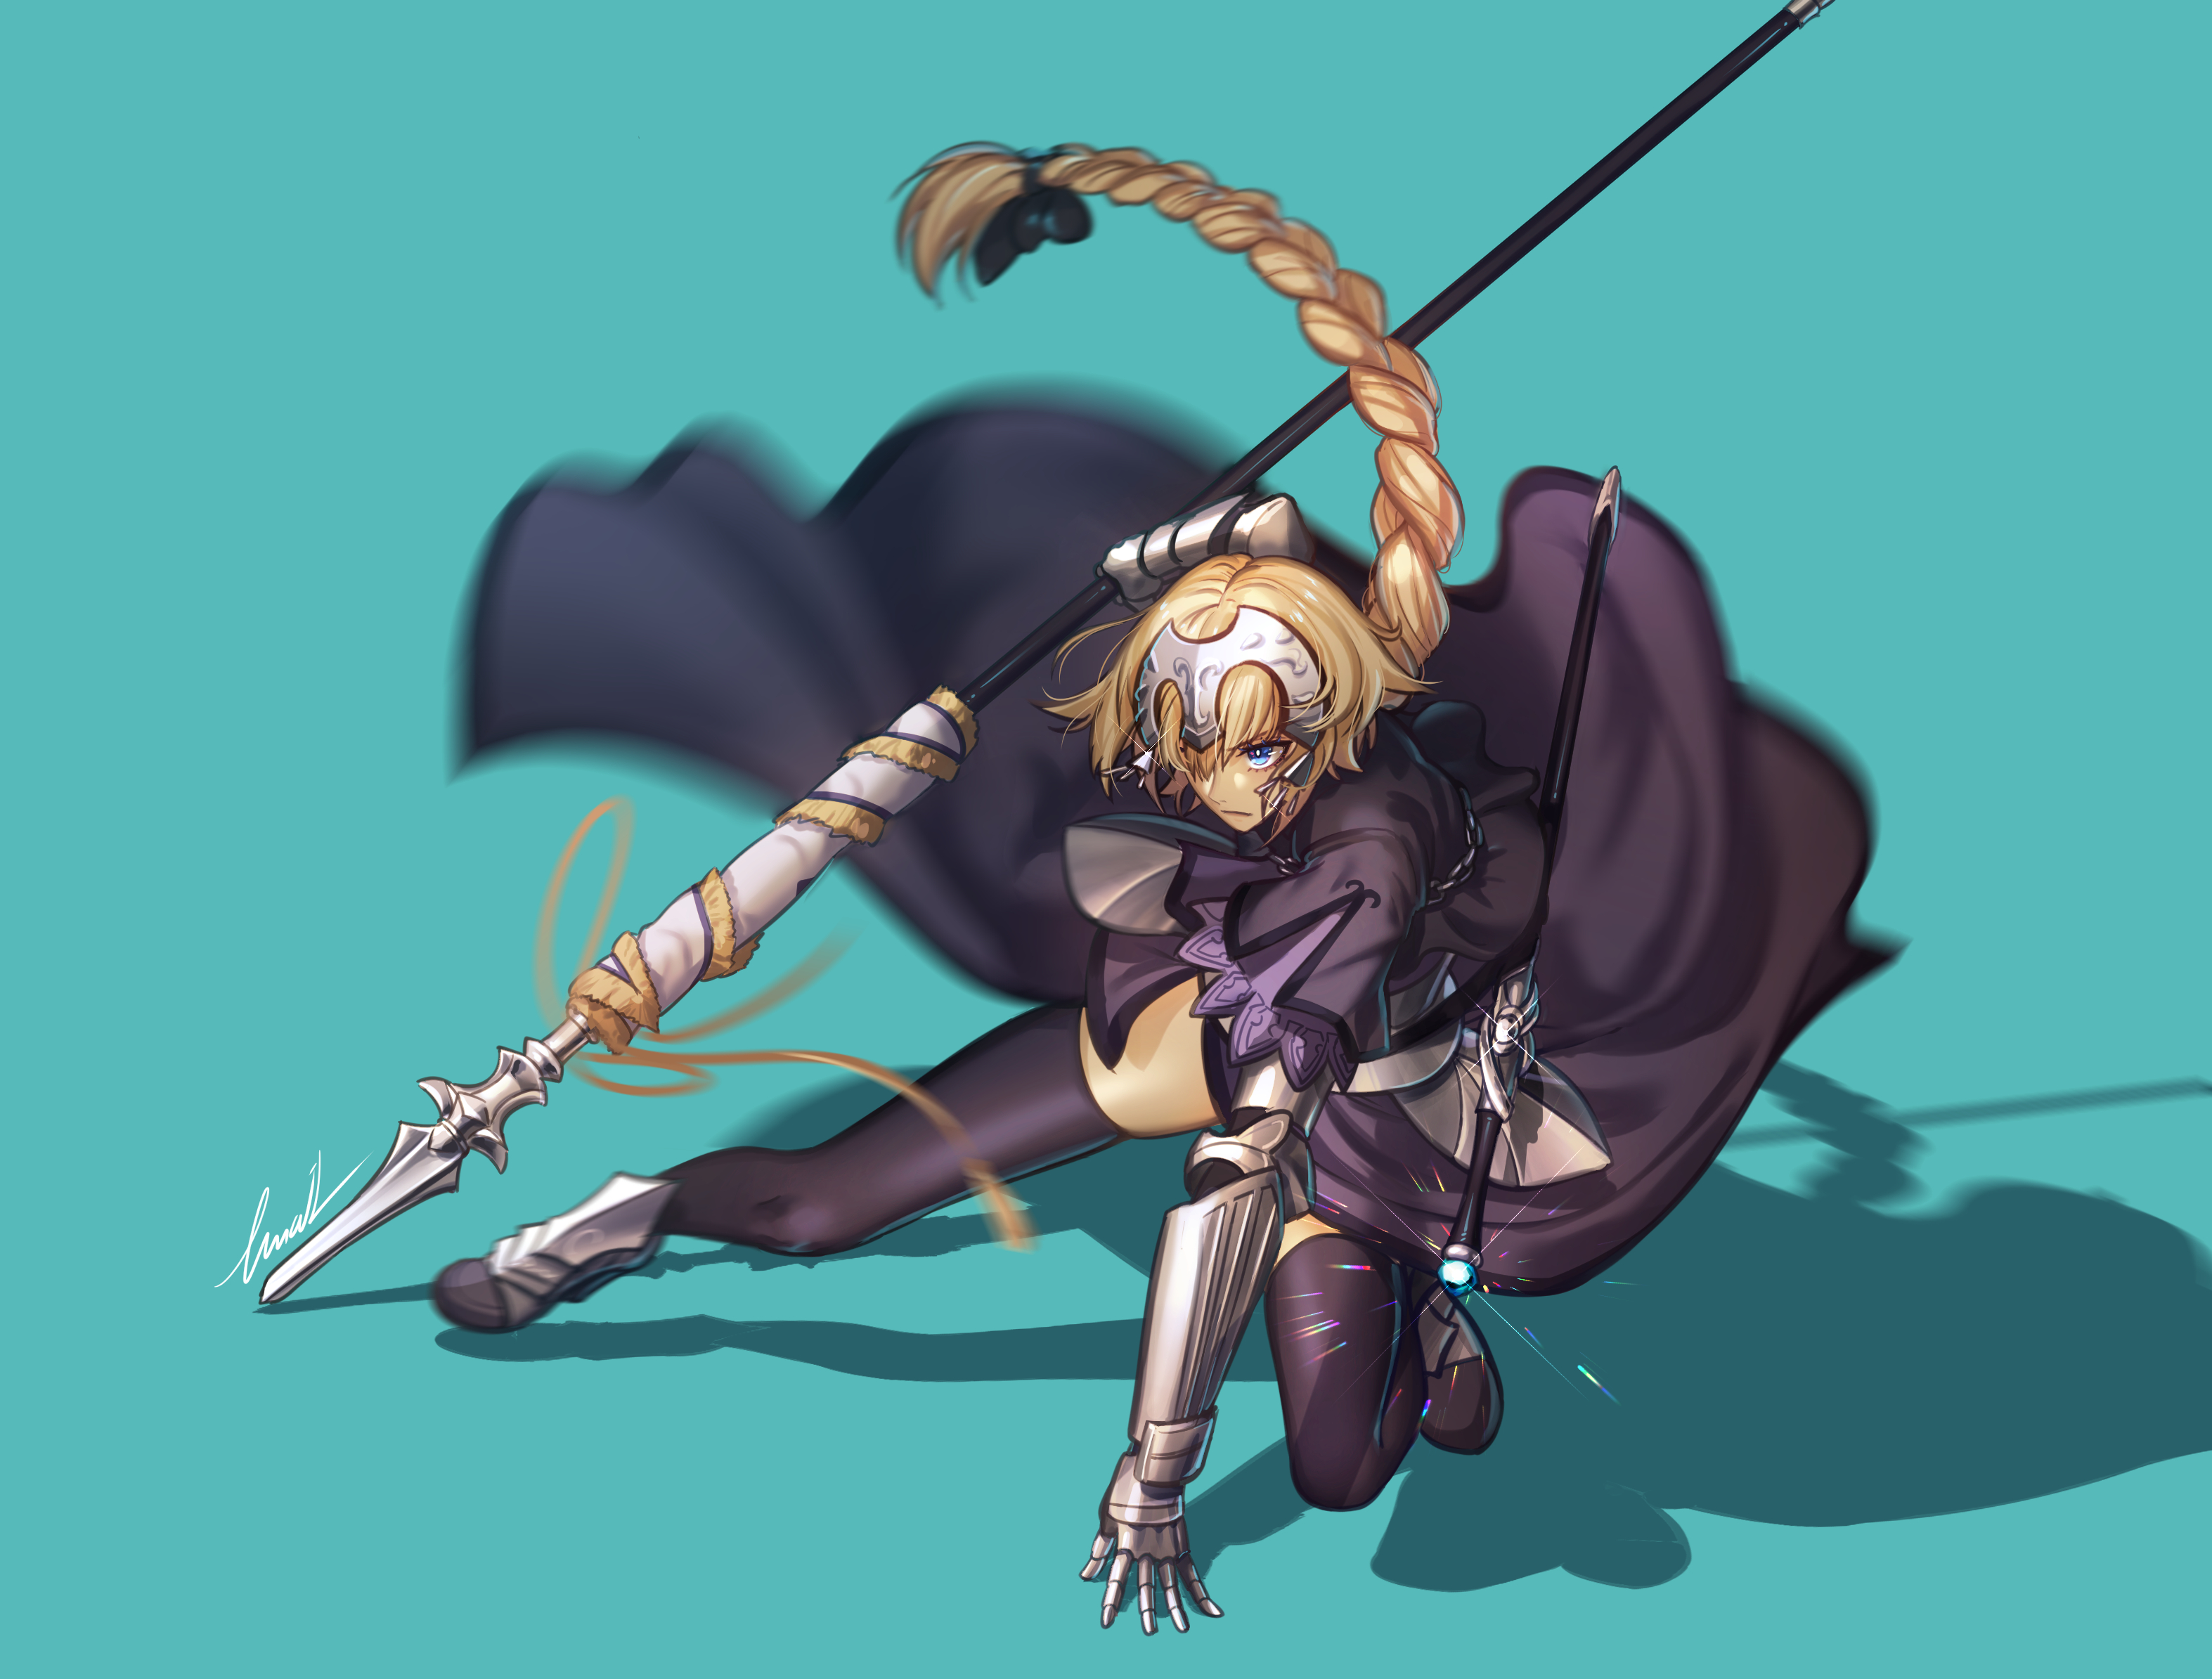 Anime 3147x2389 Fate series Fate/Grand Order Fate/Apocrypha  Jeanne d'Arc (Fate) Ruler (Fate/Apocrypha) blonde blue eyes anime girls turquoise